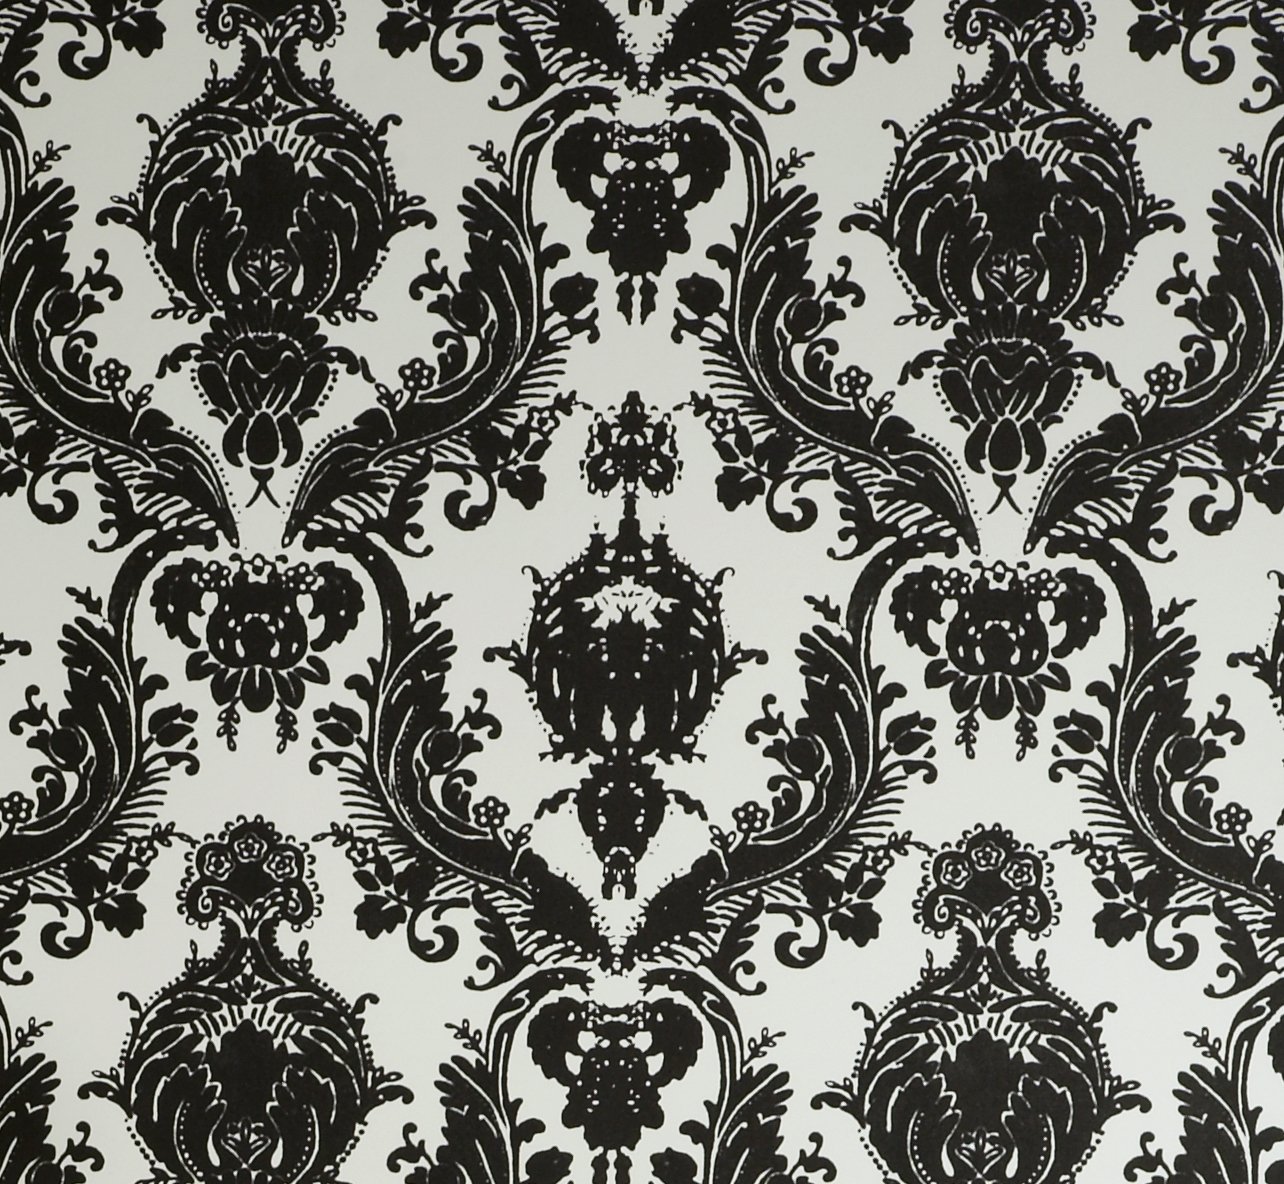 black and white removable wallpaper,pattern,visual arts,design,pattern,ornament